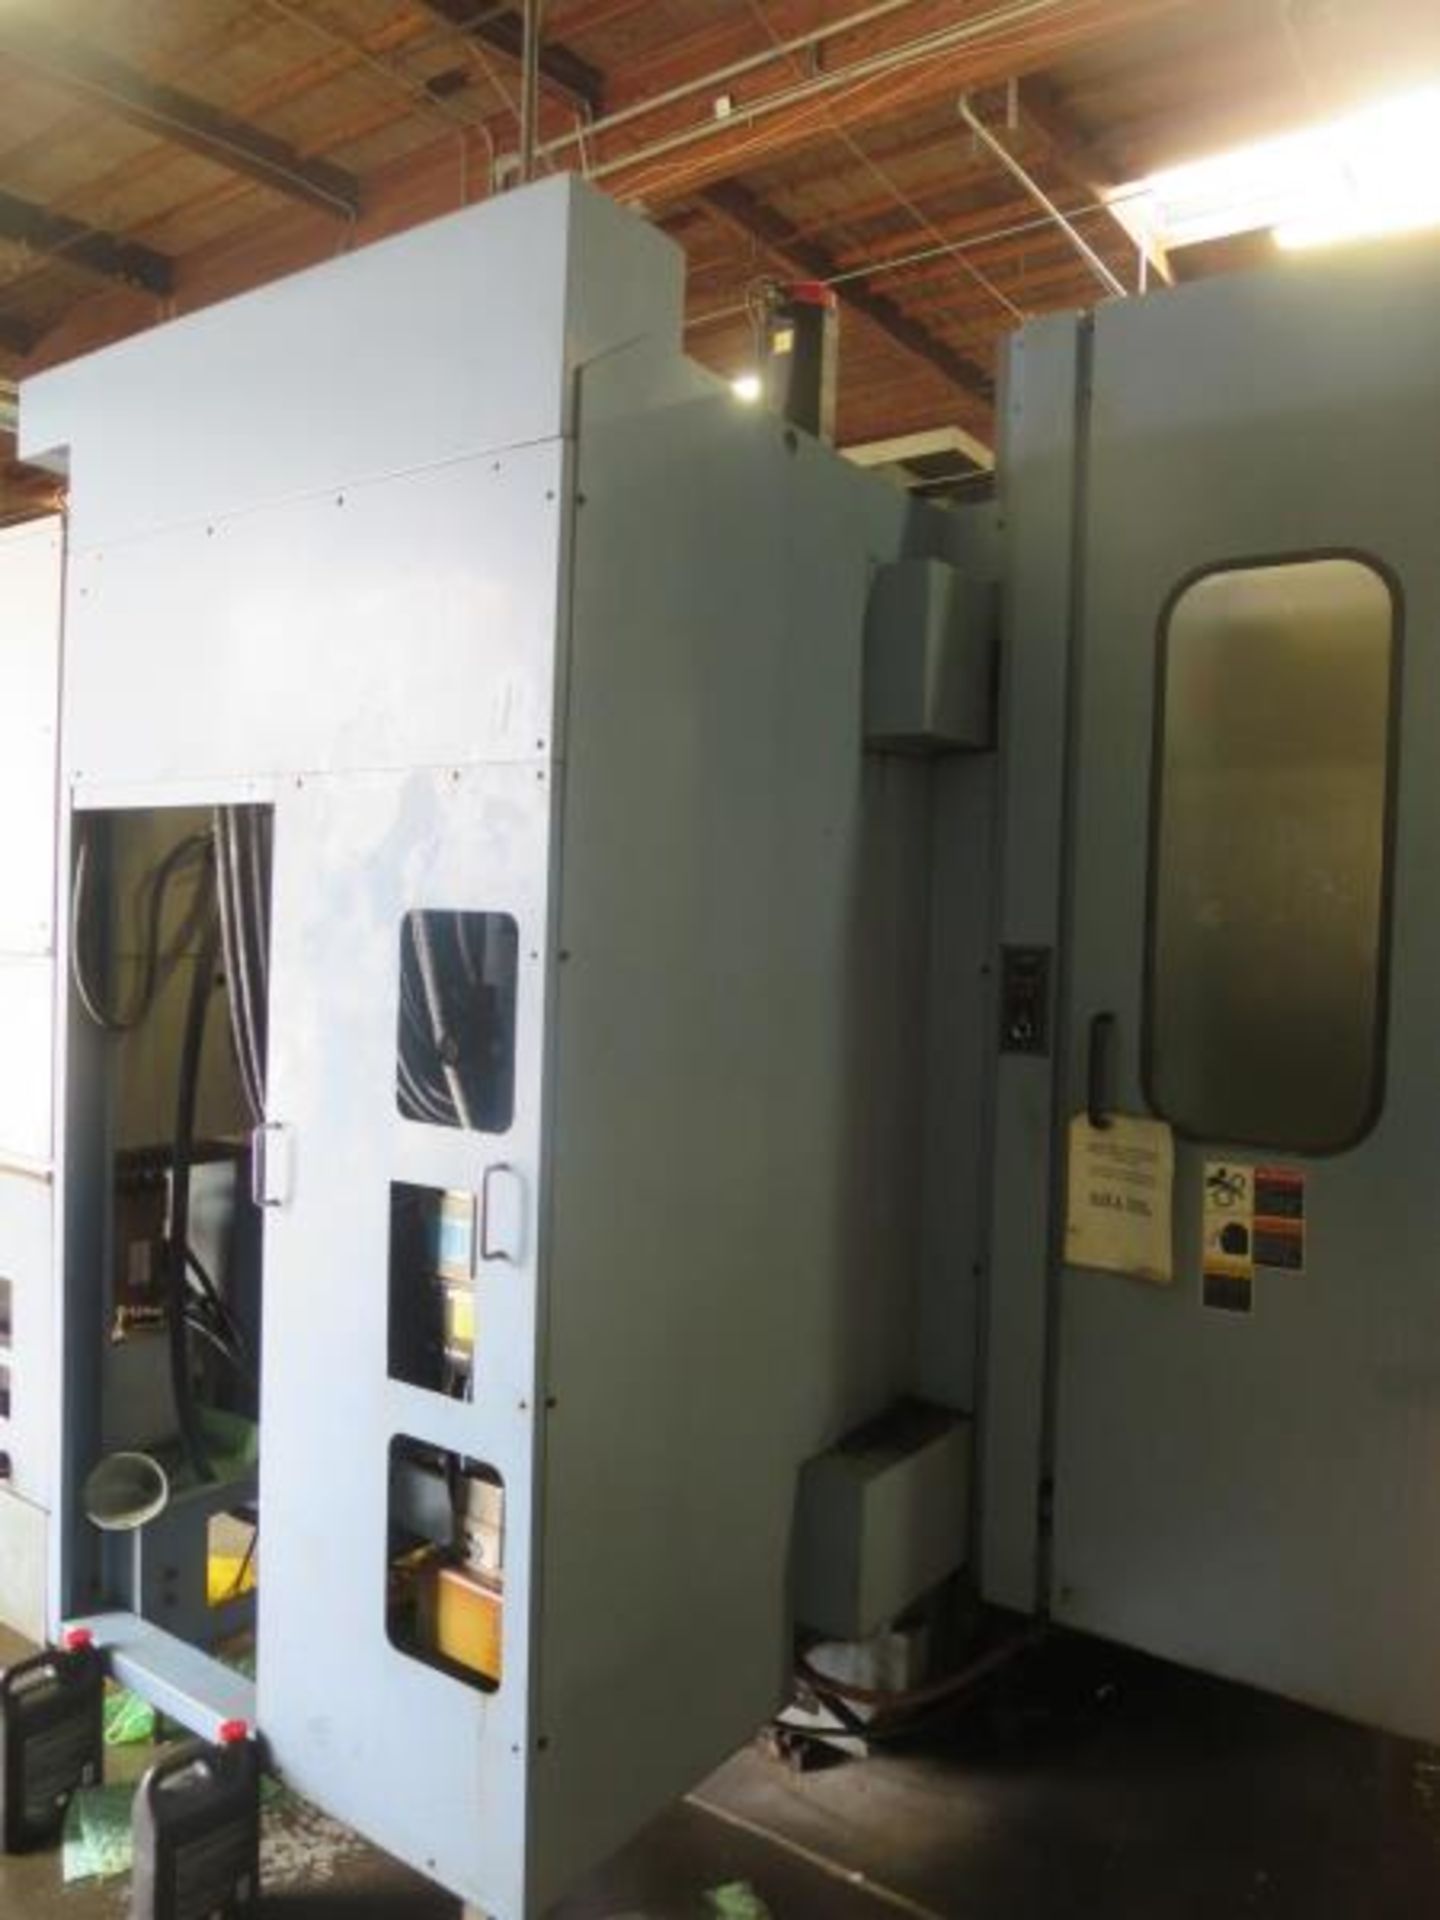 OKK MCH600 CNC Horizontal Machining Center. 4 Axis, 40hp, 2 Step Max 10,000 RPM Spindle, 2-Automatic - Image 13 of 16